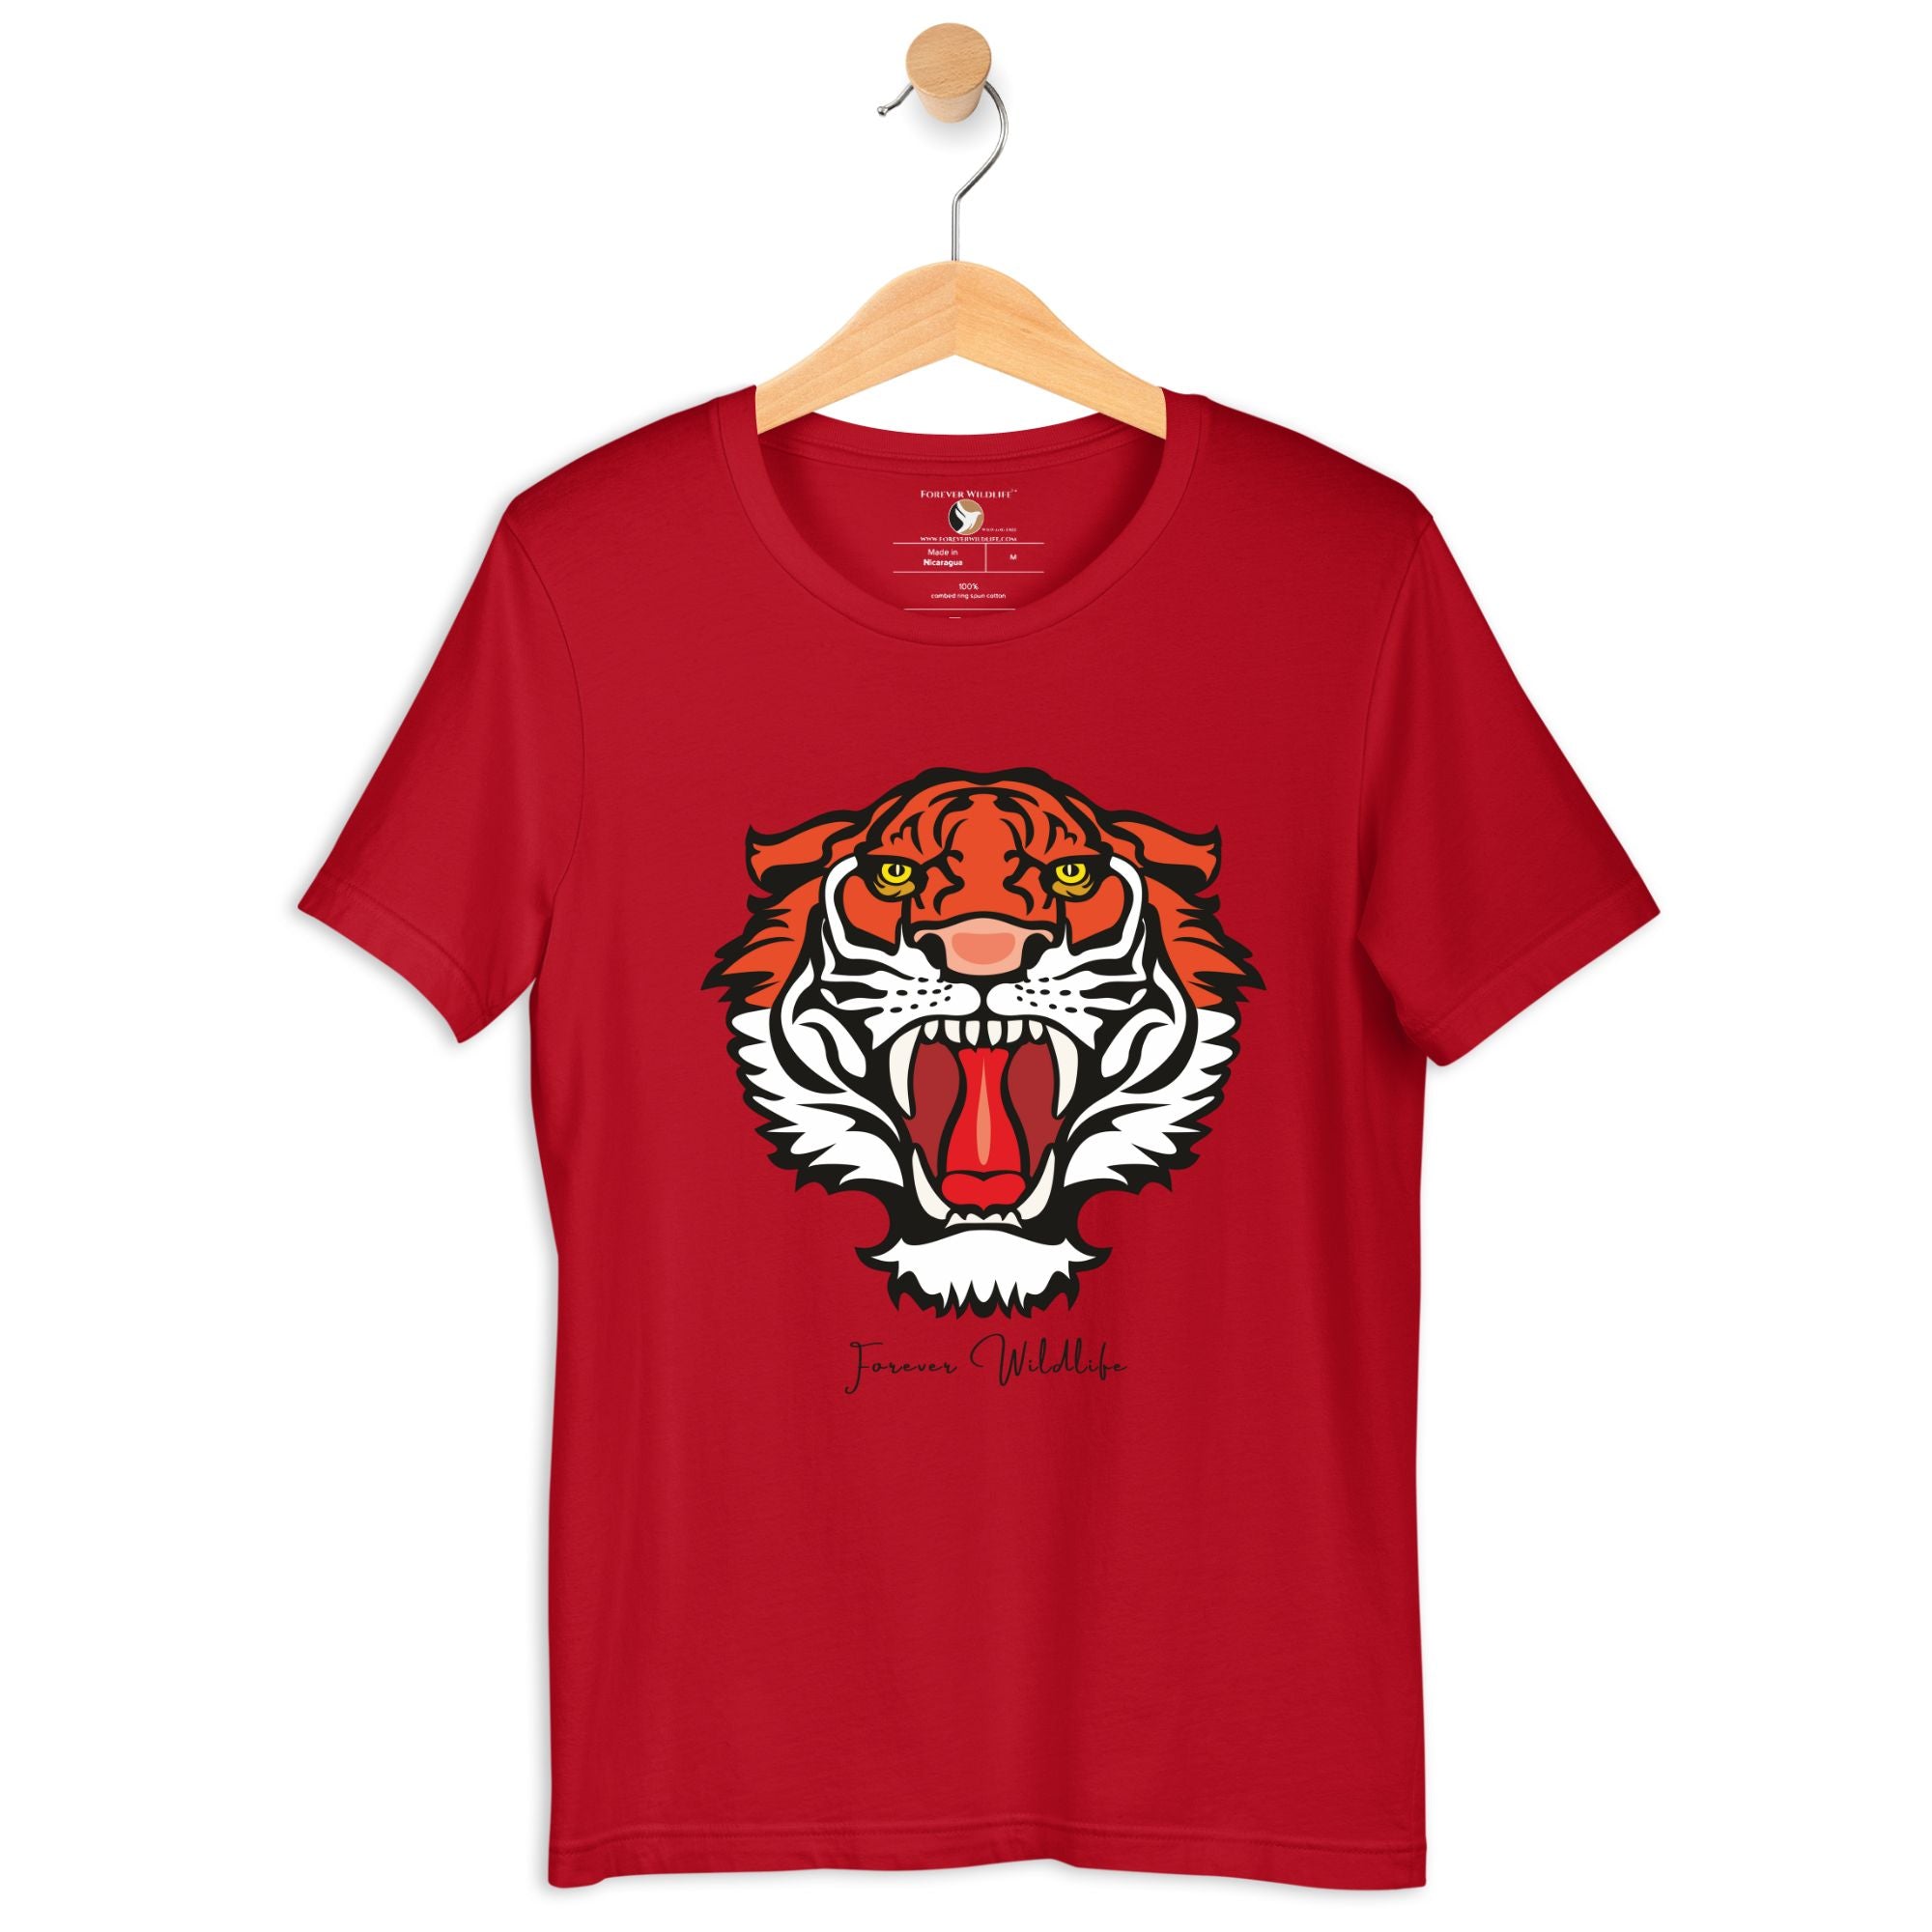 Tiger T-Shirt in Red – Premium Wildlife T-Shirt Design, Wildlife Clothing & Apparel from Forever Wildlife